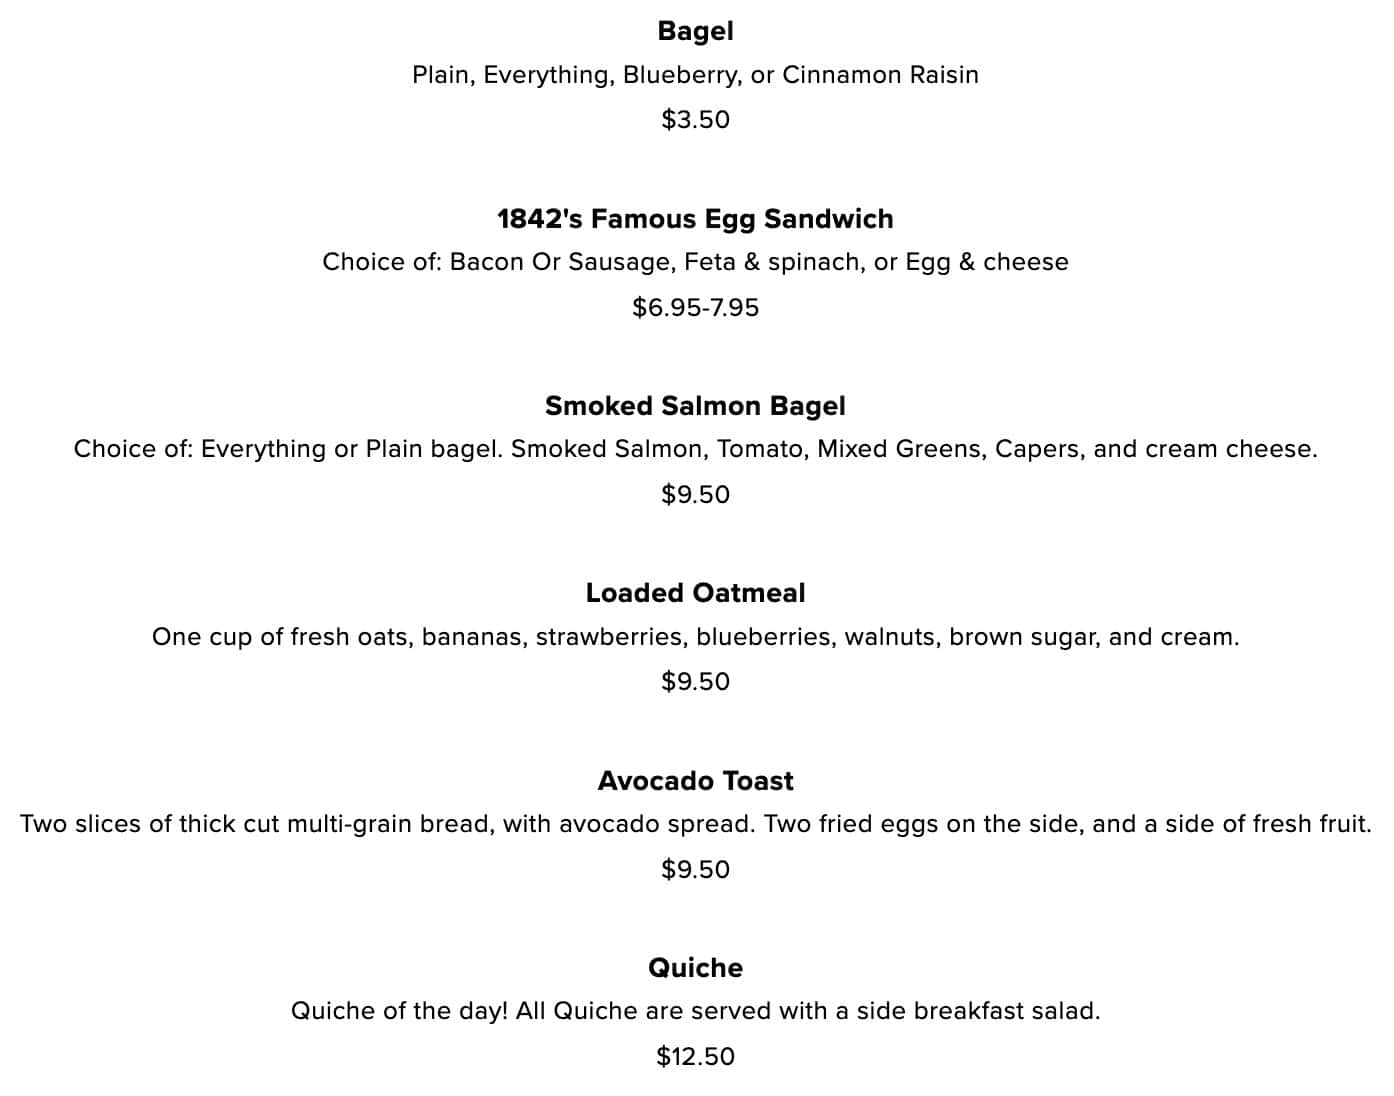 1842 Daily Grind and Mercantile Breakfast Menu